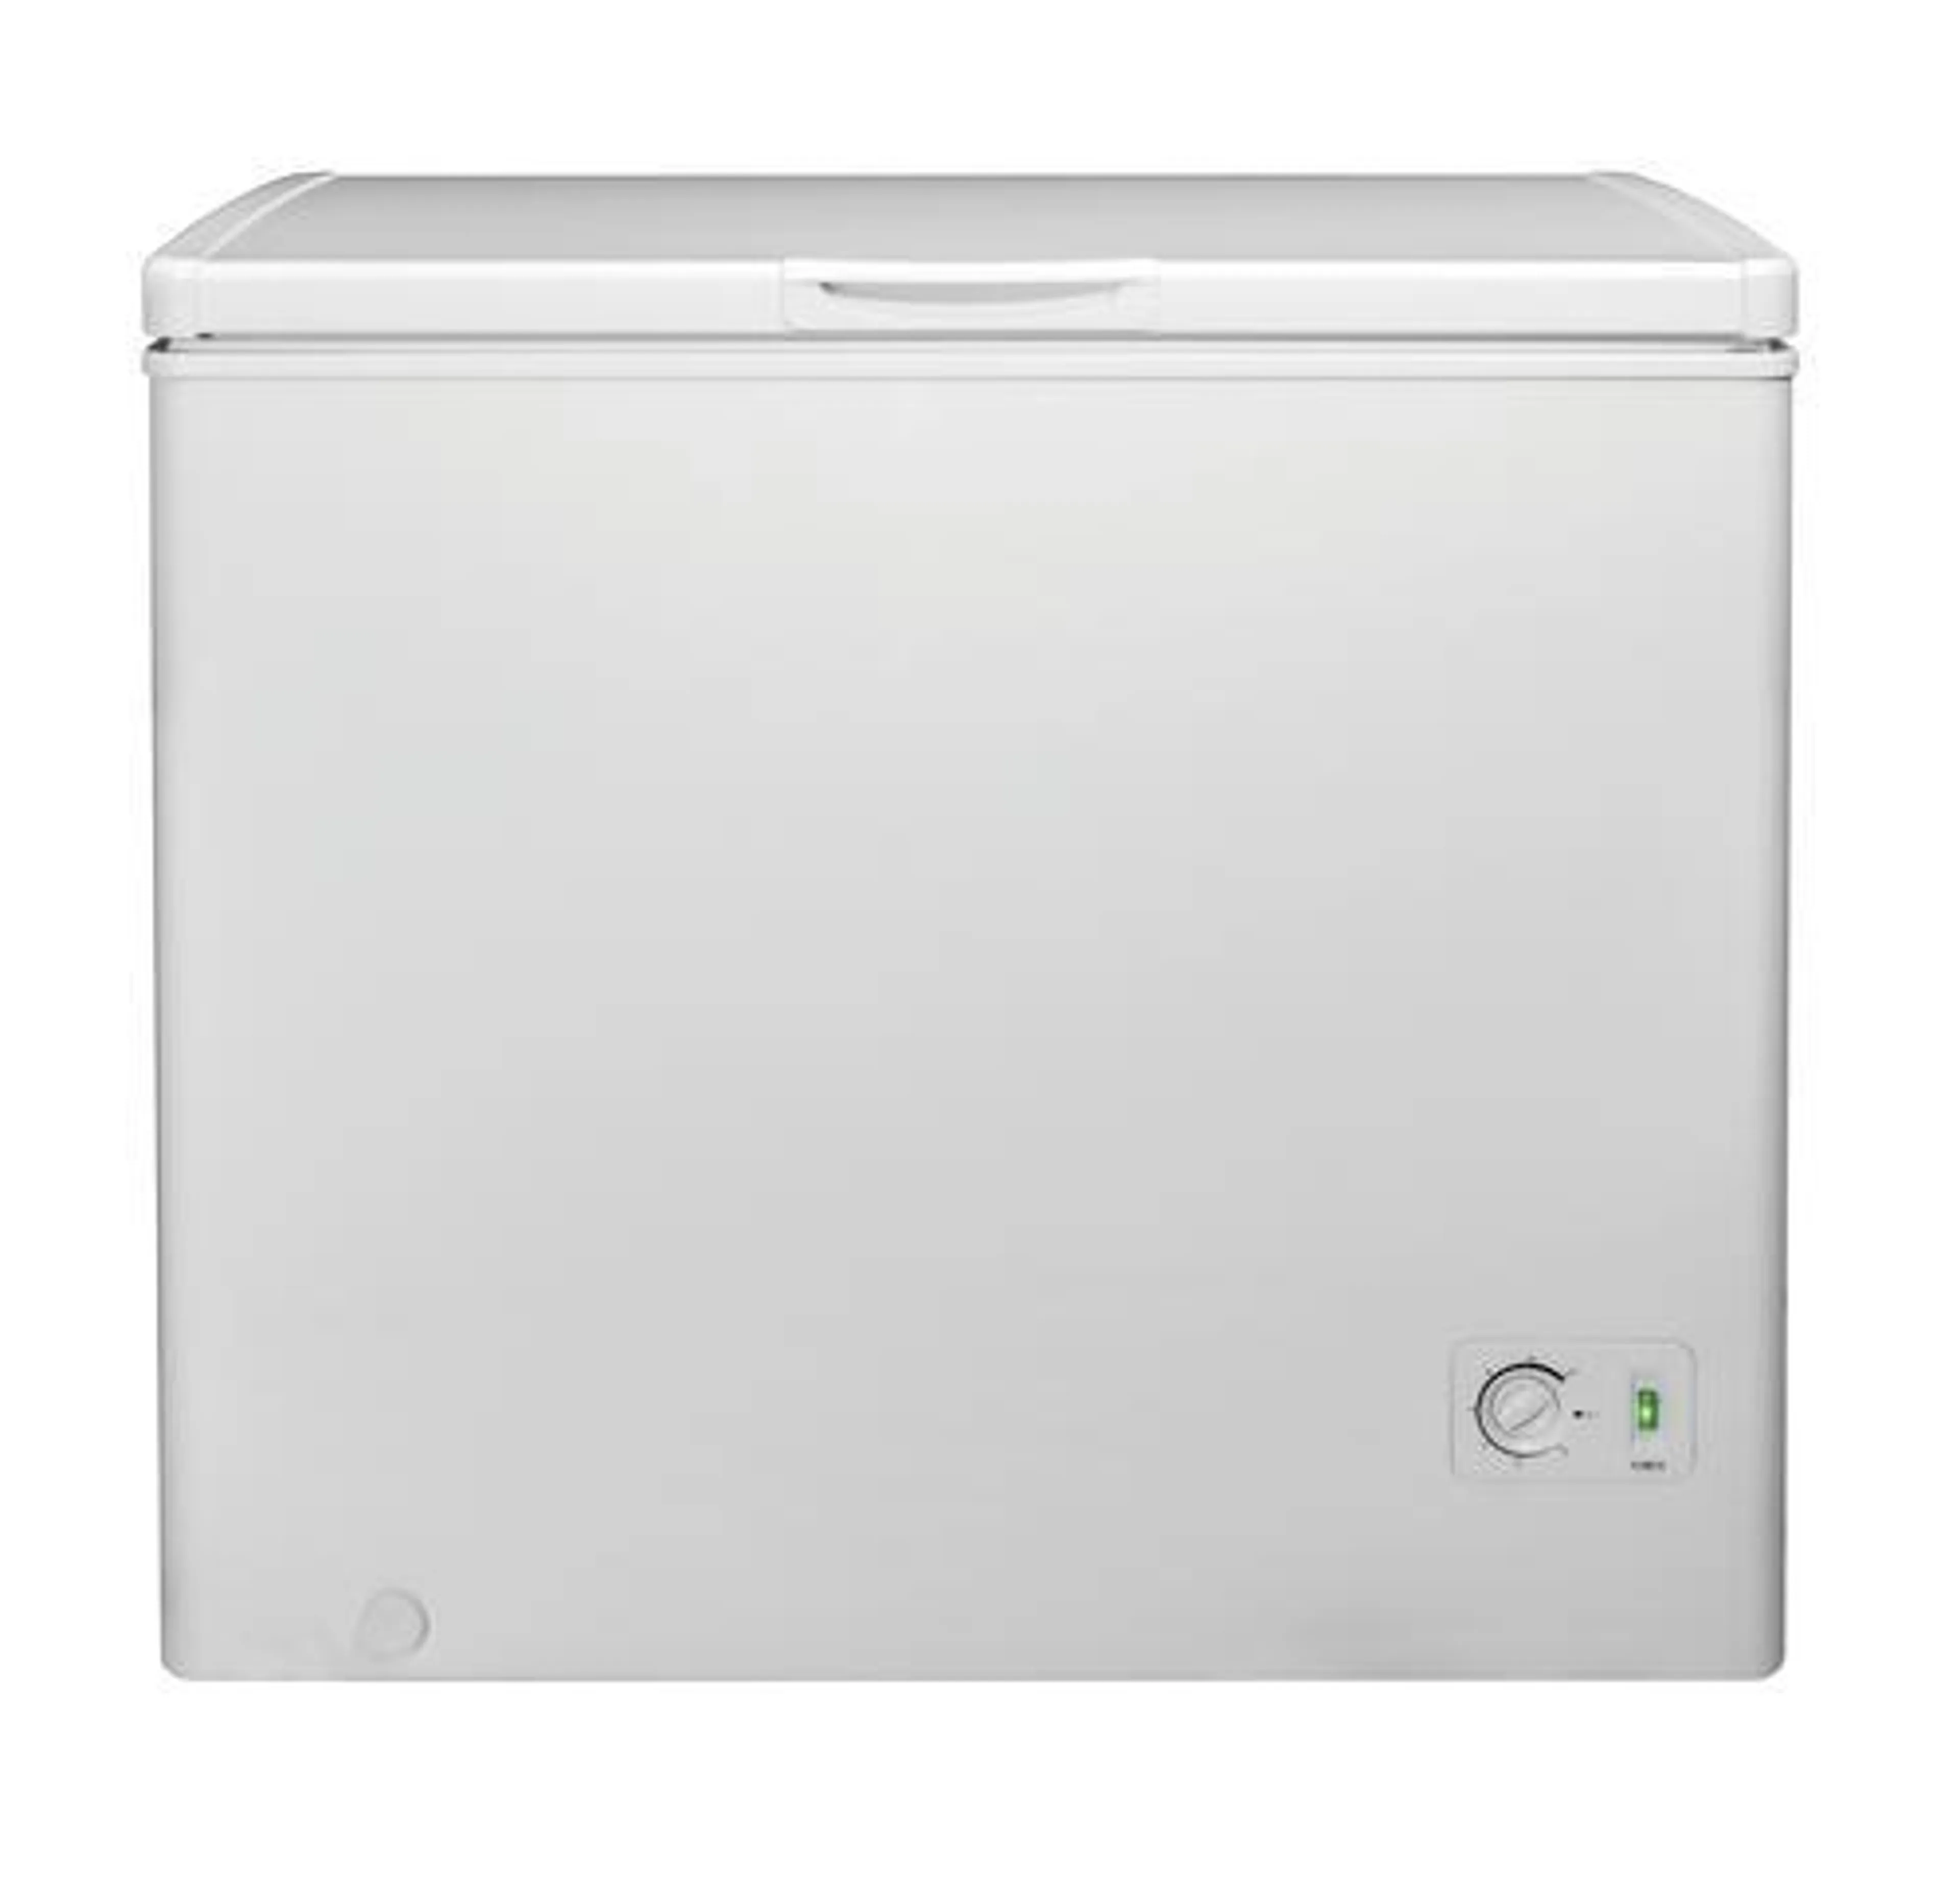 7.0 cu.ft. White Manual Defrost Chest Freezer